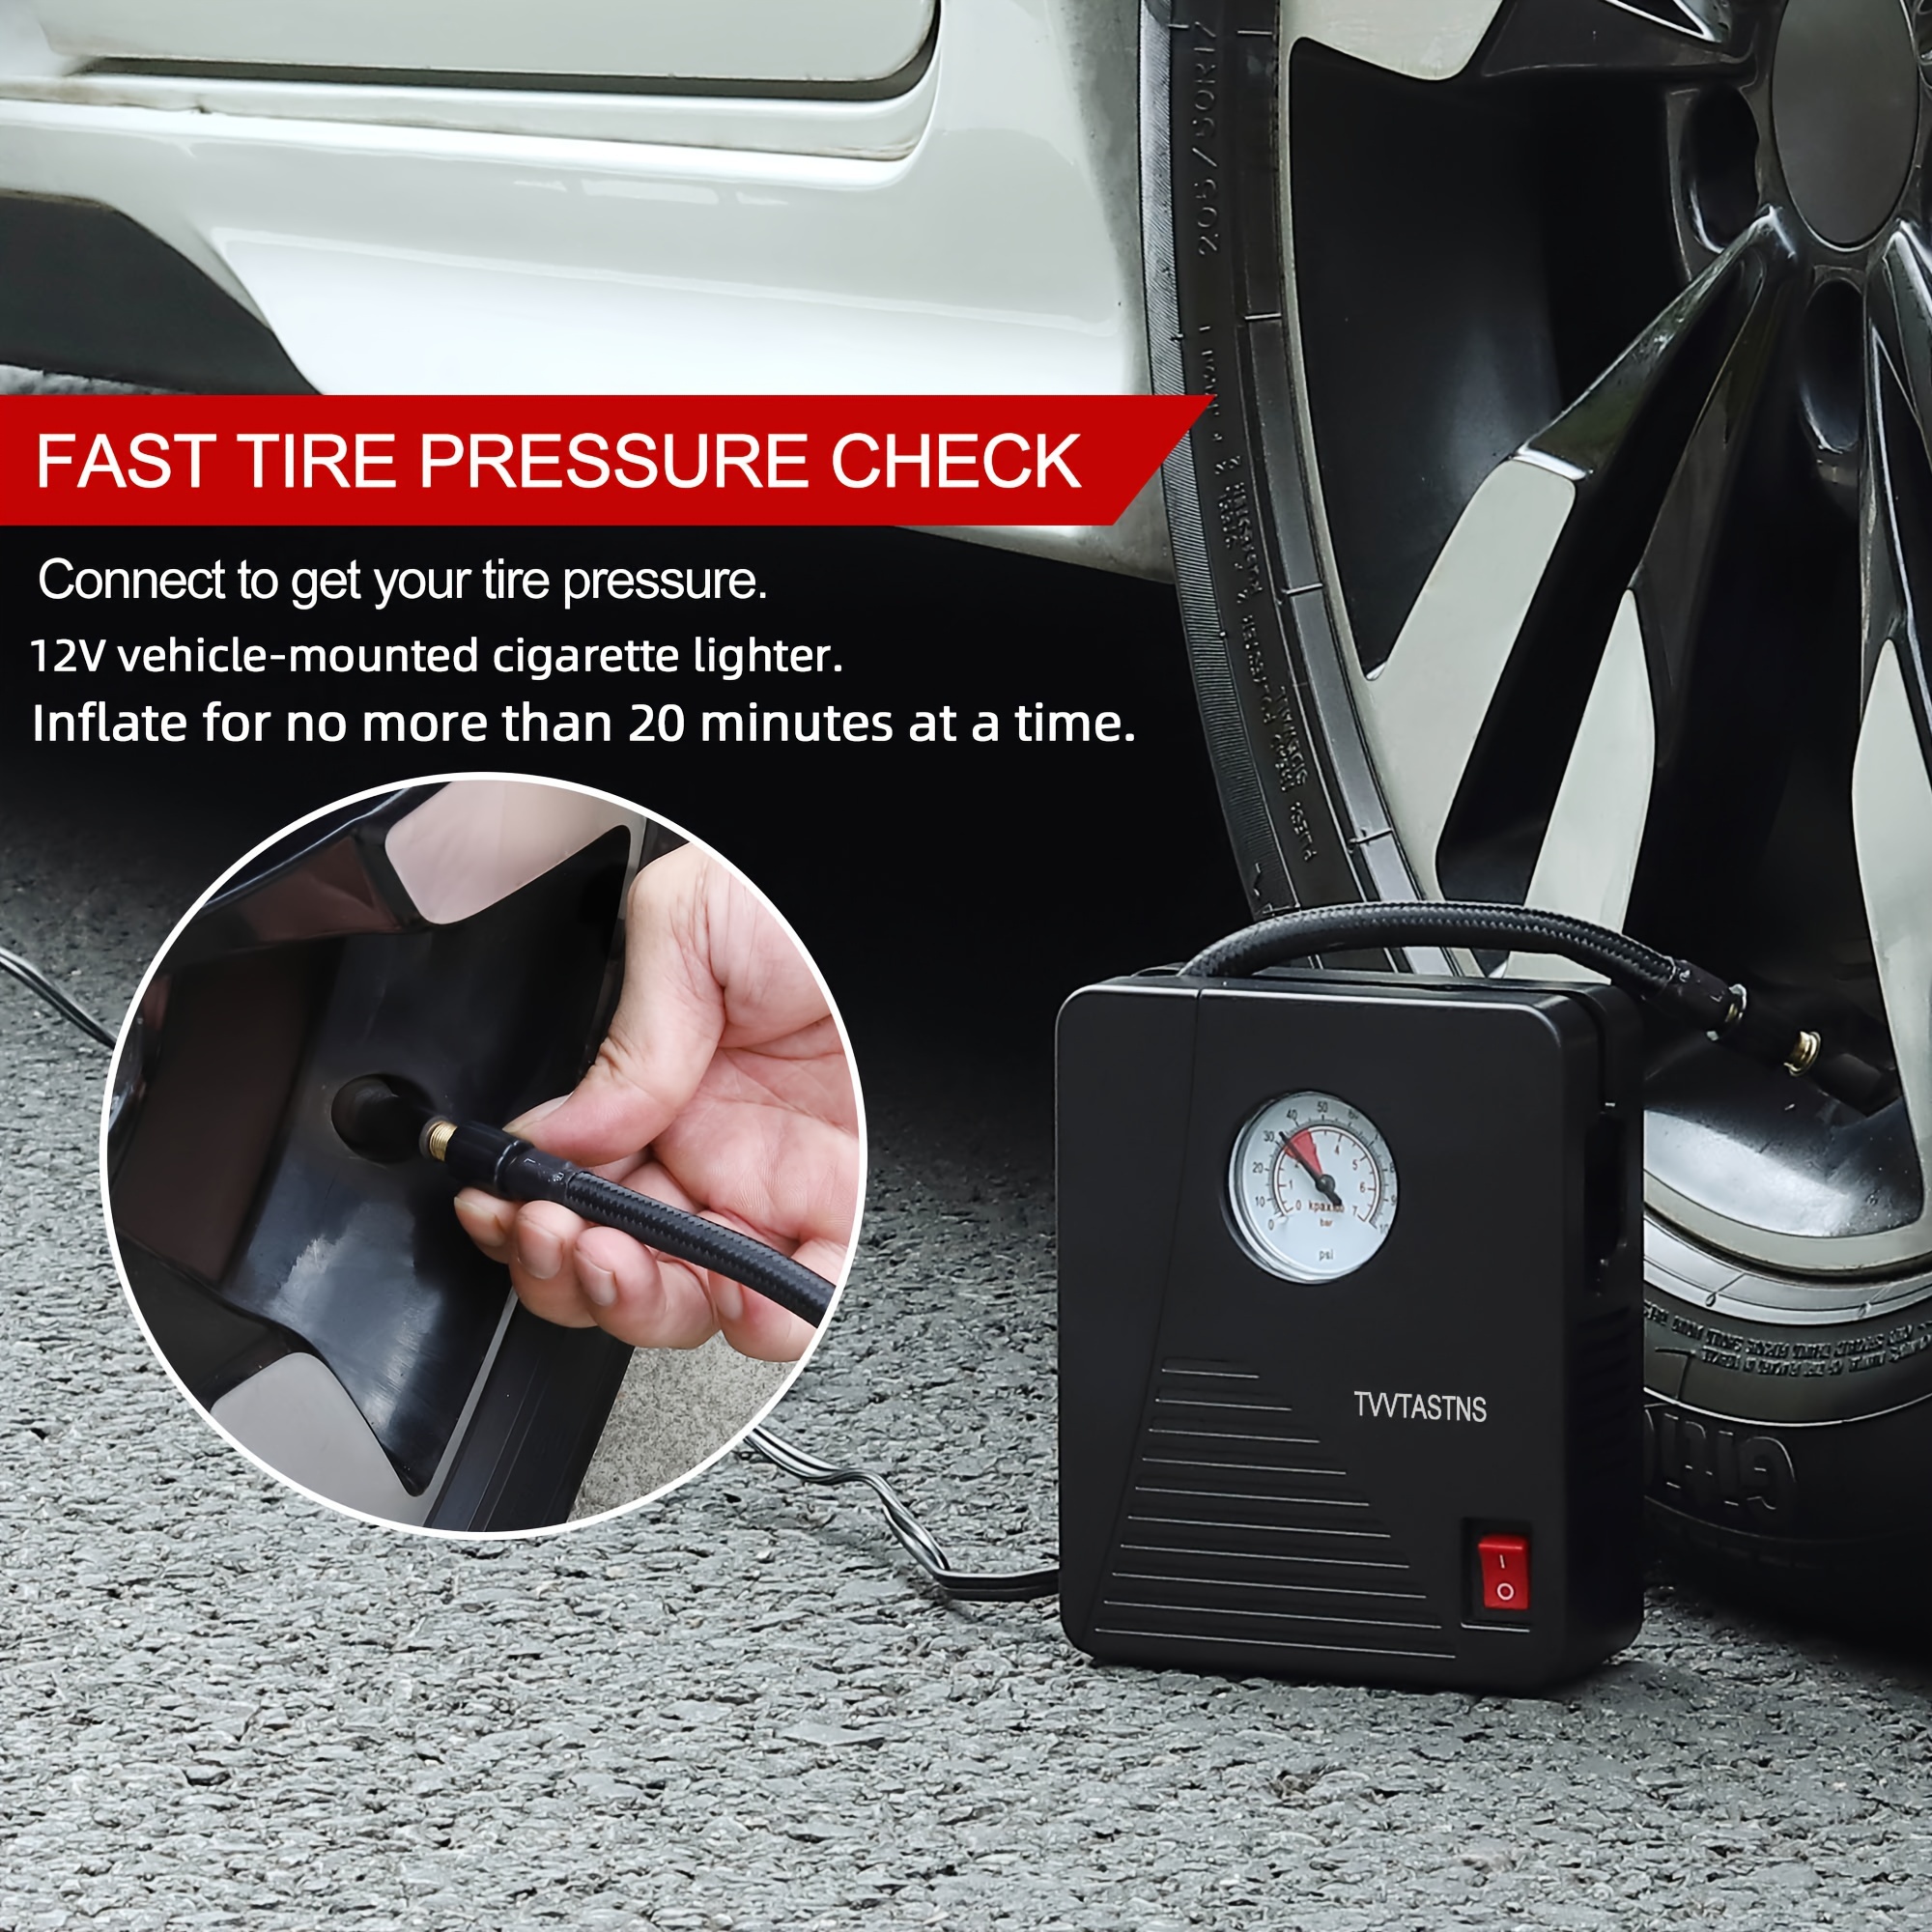 ZMOON Tire Inflator Portable Air Compressor, 2-IN-1 150PSI Cordless & DC  12V Air Pump for Car Tires, 9000mAh 4X Faster Inflation Live Pressure Gauge